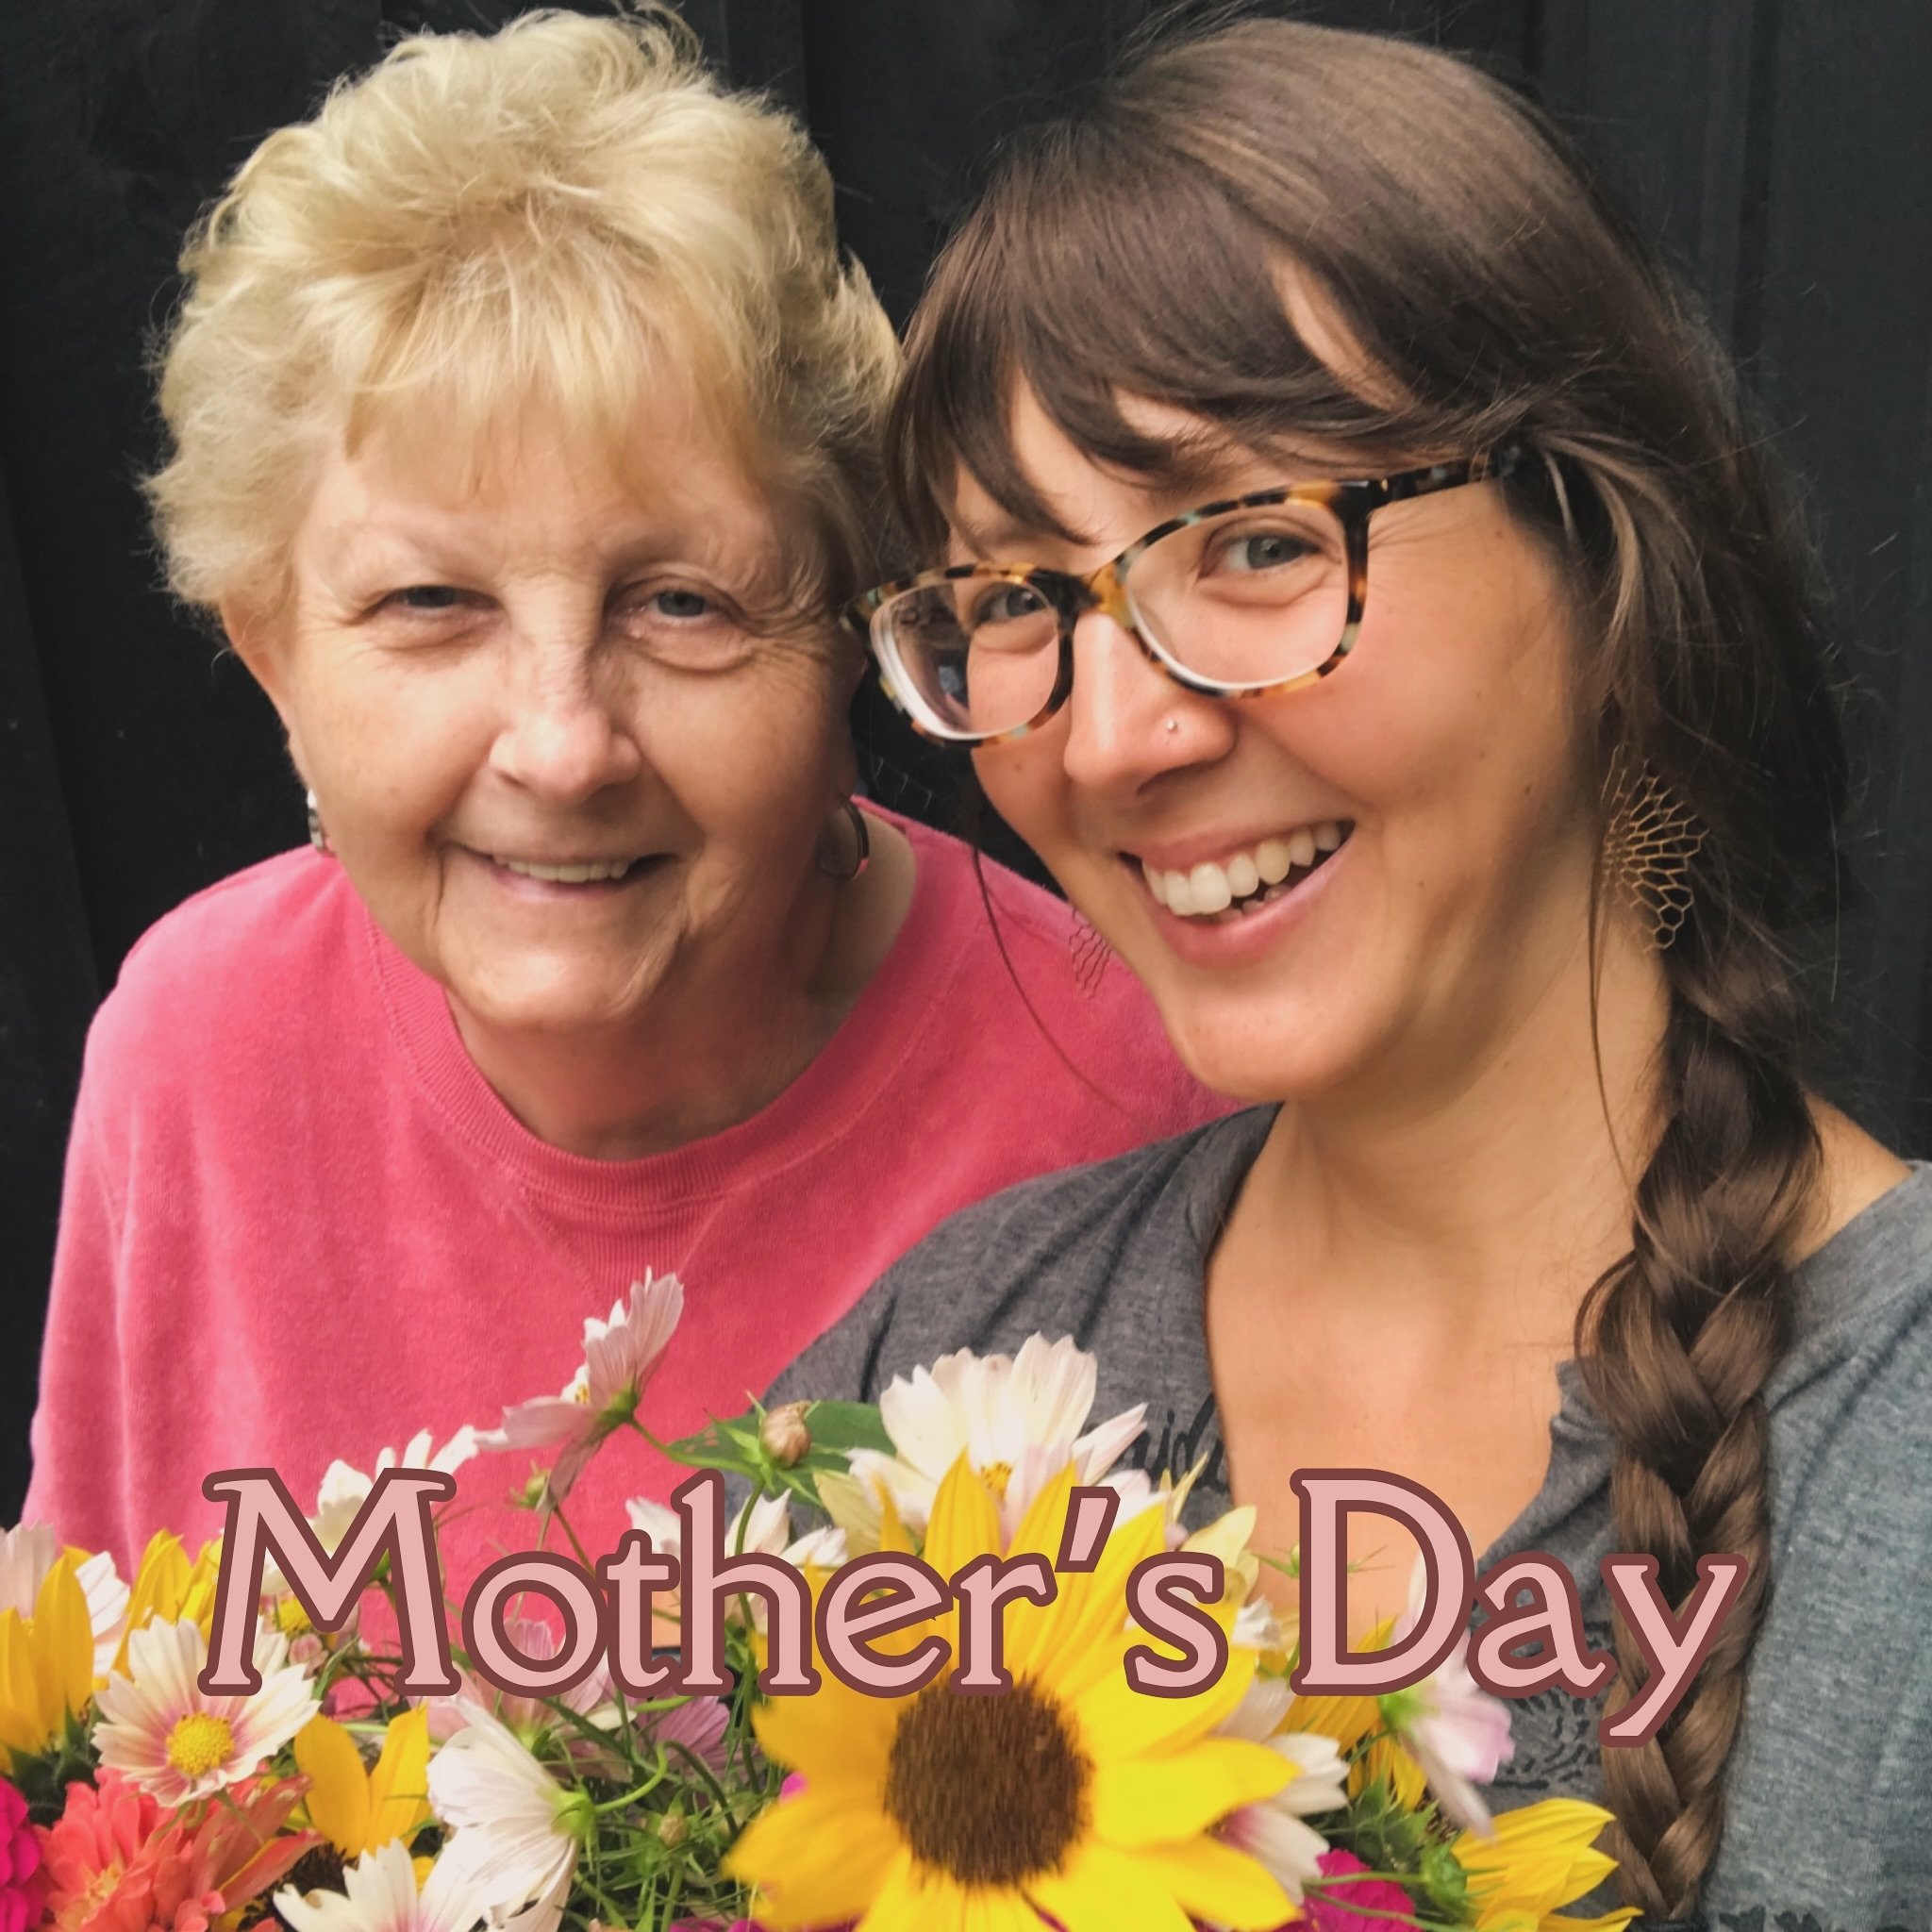 I&rsquo;ll always be glad for this day. 

My mother&rsquo;s last visit to the farm was in 2021. I had a busy day of bouquet making and she sat with me in the black barn while I worked. I had no idea it would be the last time she saw my home or the la